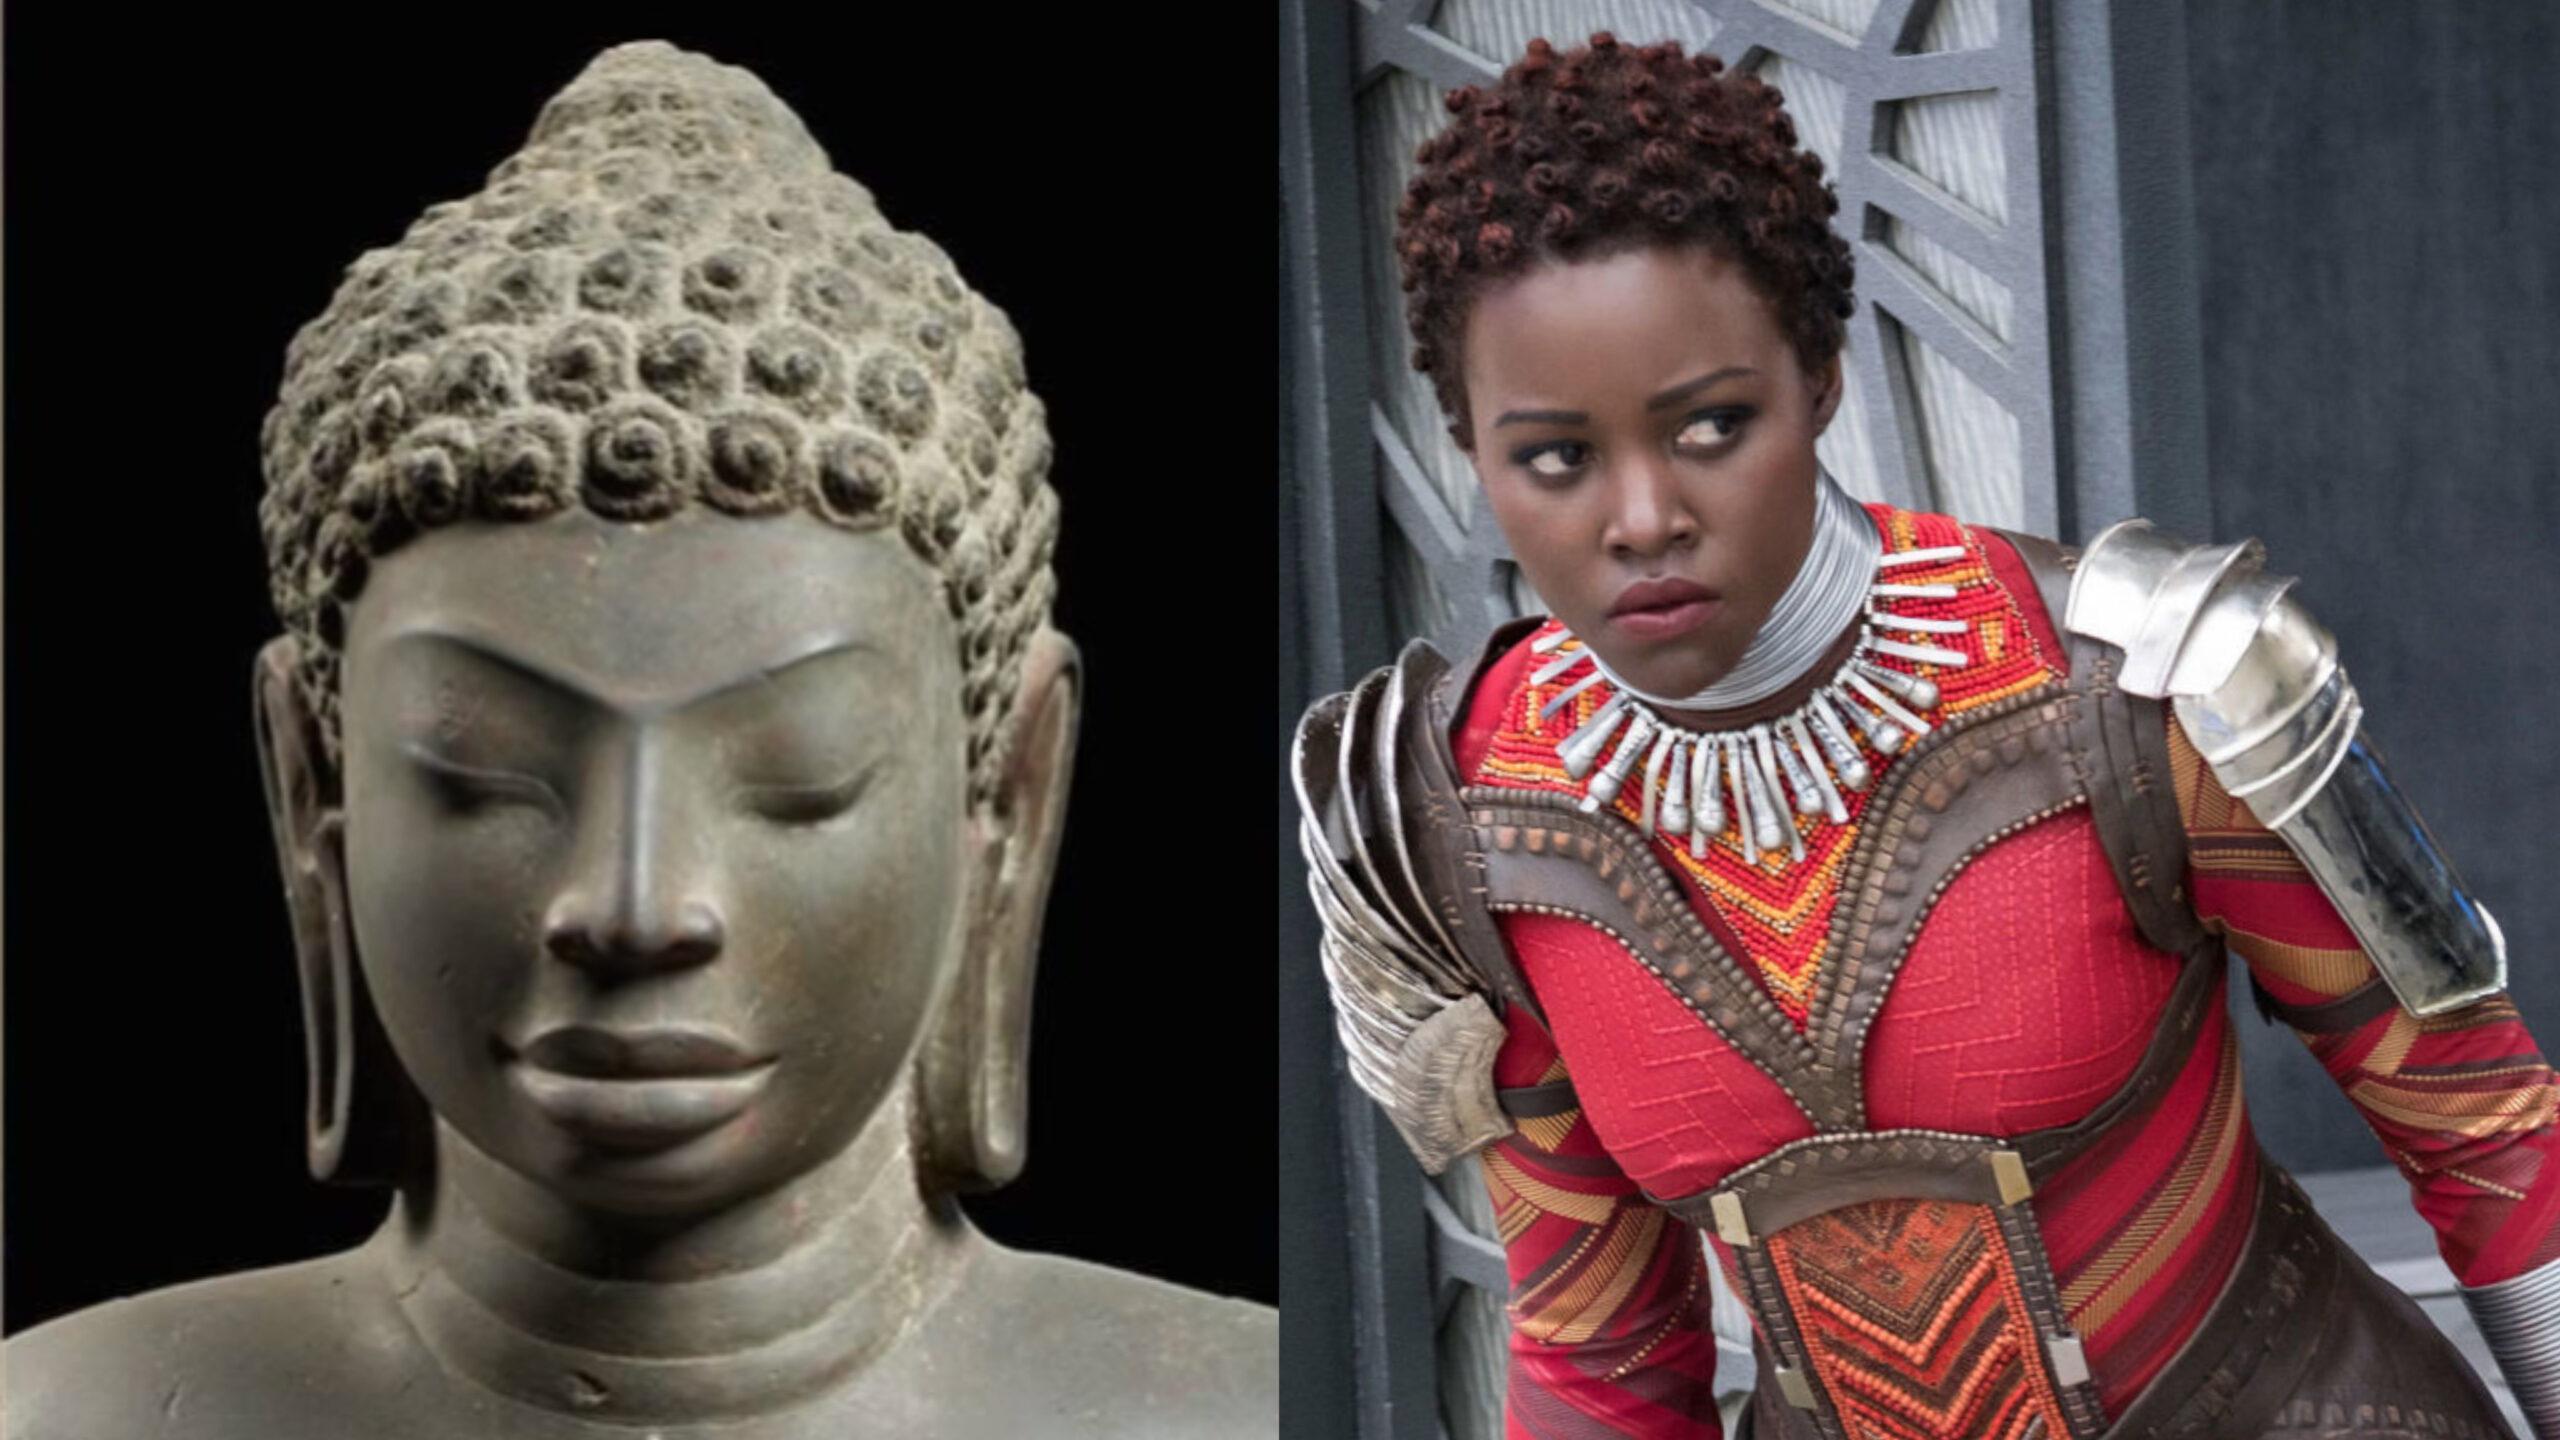 The original Buddha was wearing the hairstyle known today as Bantu knots [15th century BC]